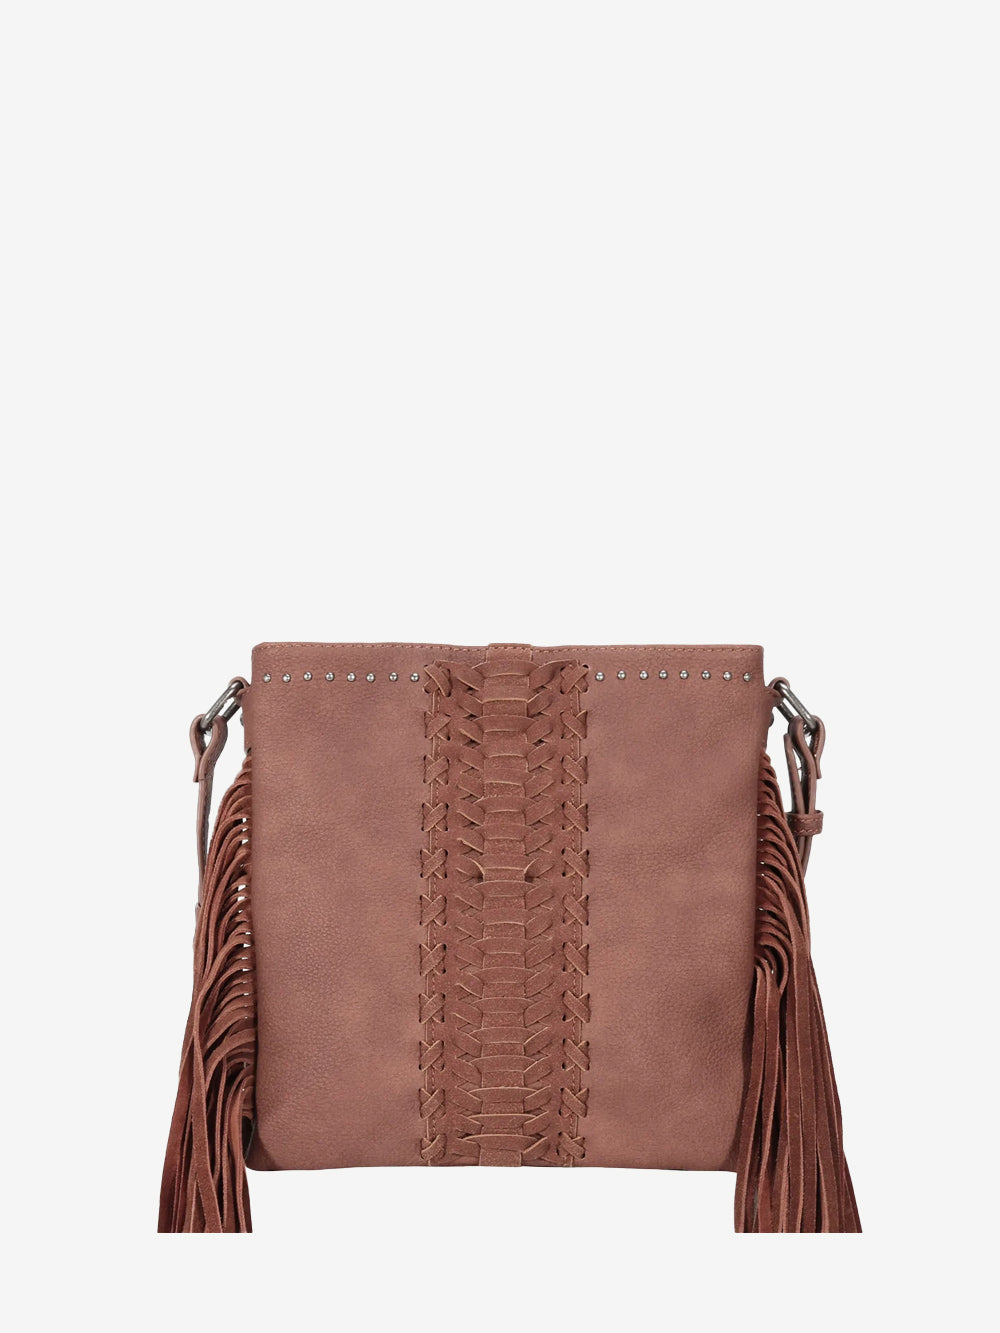 Trinity Ranch Leather Fringe Basketweave Concealed Carry Crossbody